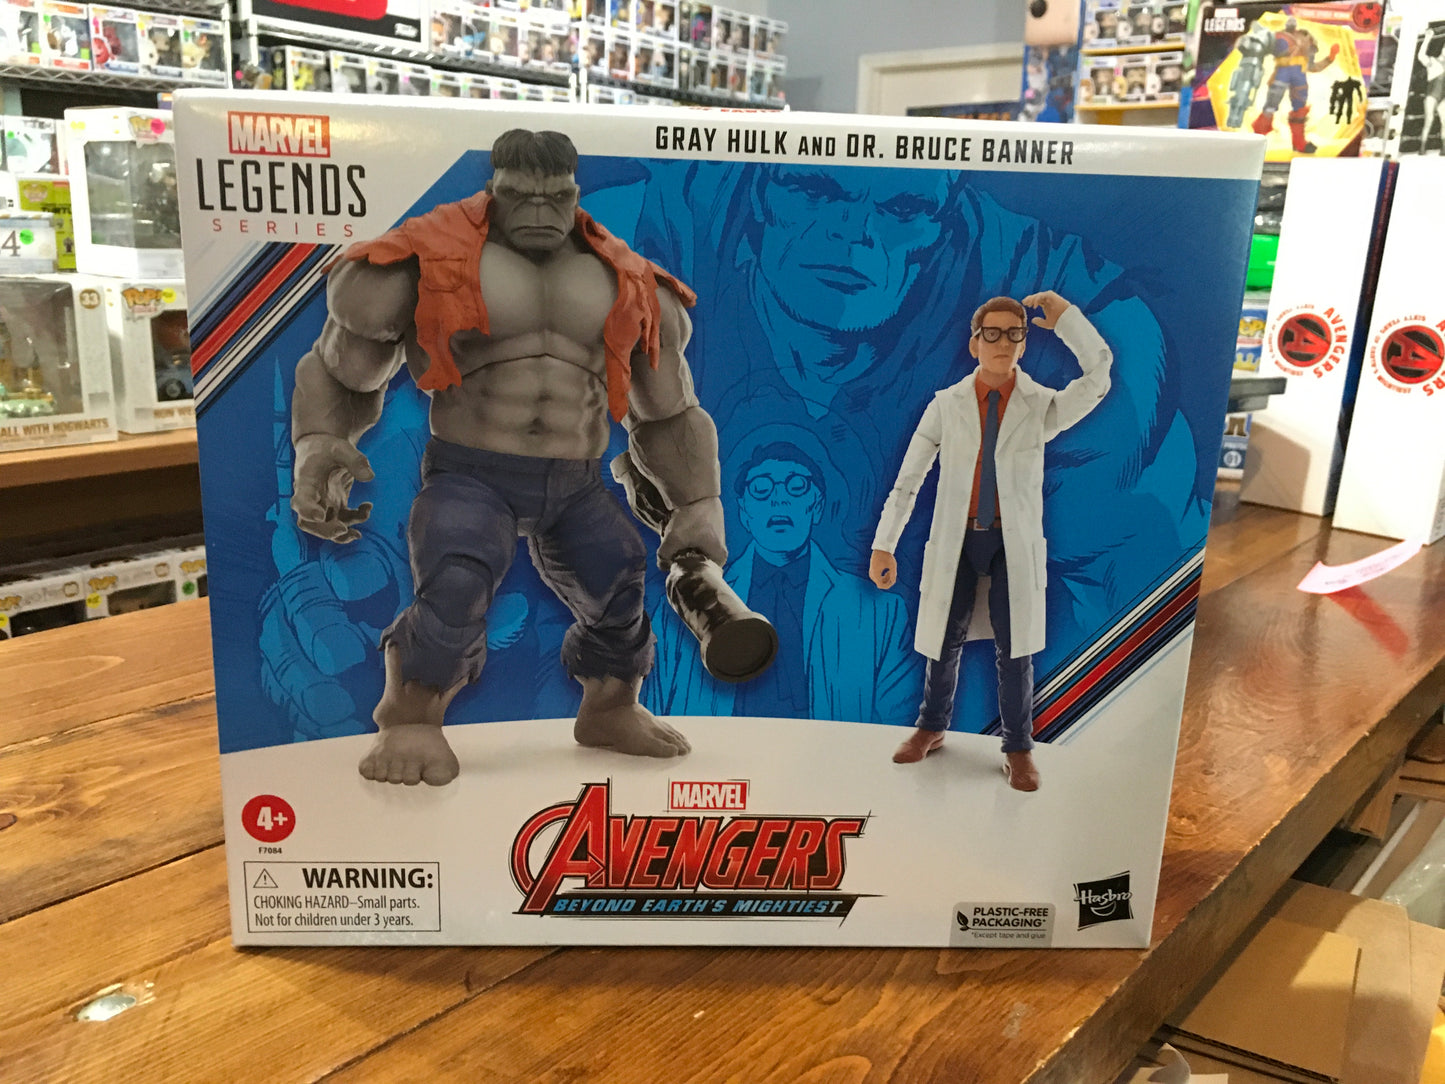 Marvel Legends - Gray Hulk and Bruce Banner 2-pack -Action Figure by Hasbro